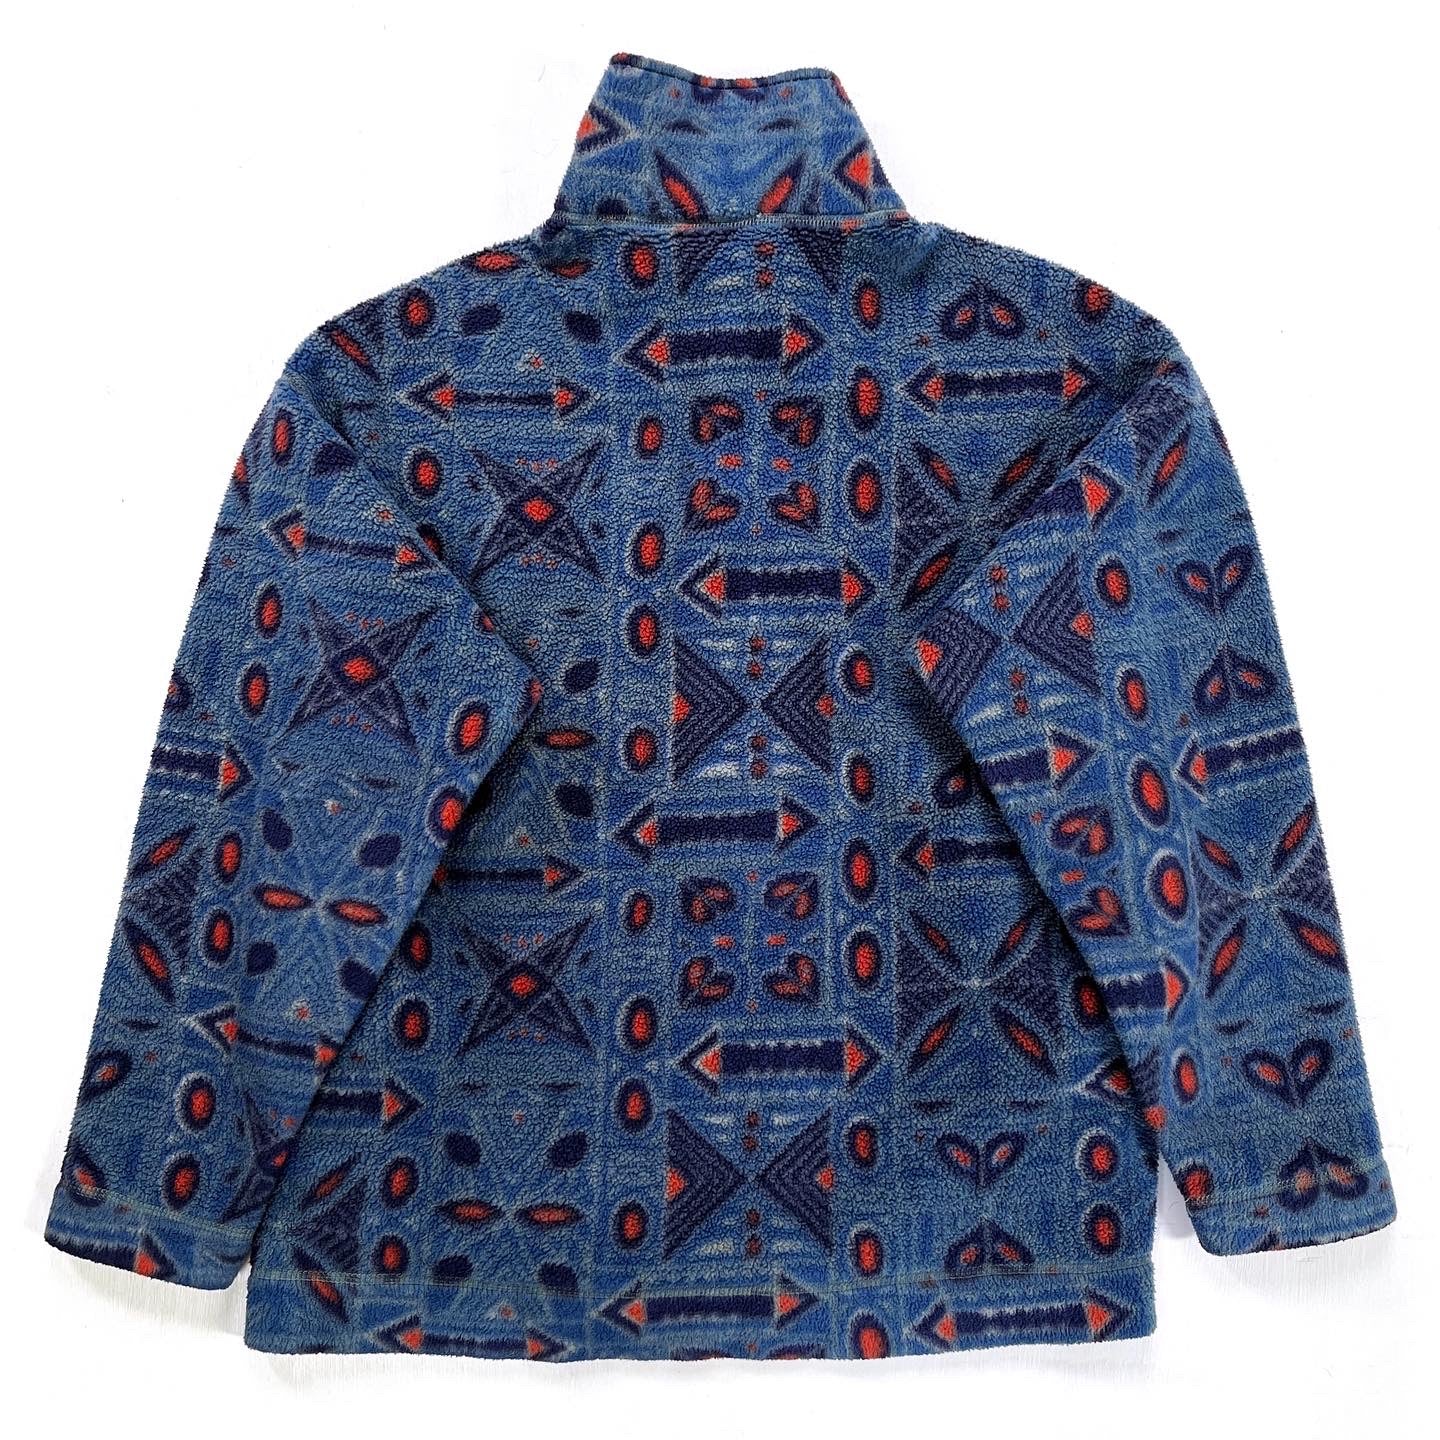 1993 Patagonia Printed Synchilla Sweater, Totem: Prussian Blue (S/M)